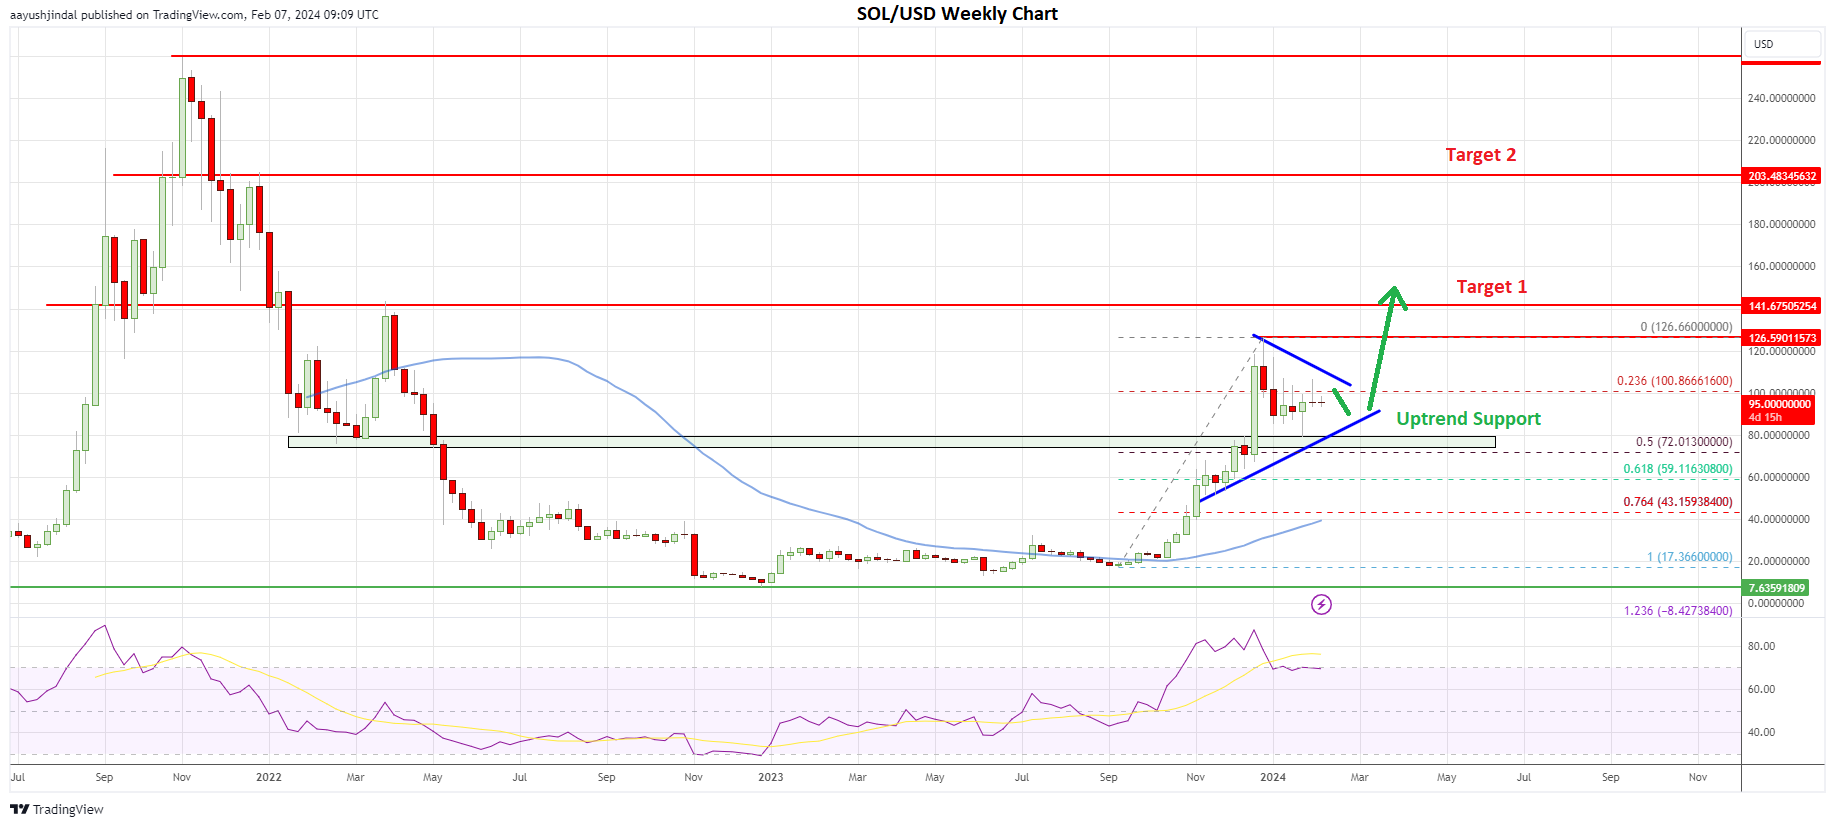 Solana price daily chart | Source: SOL/USD on TradingView.com